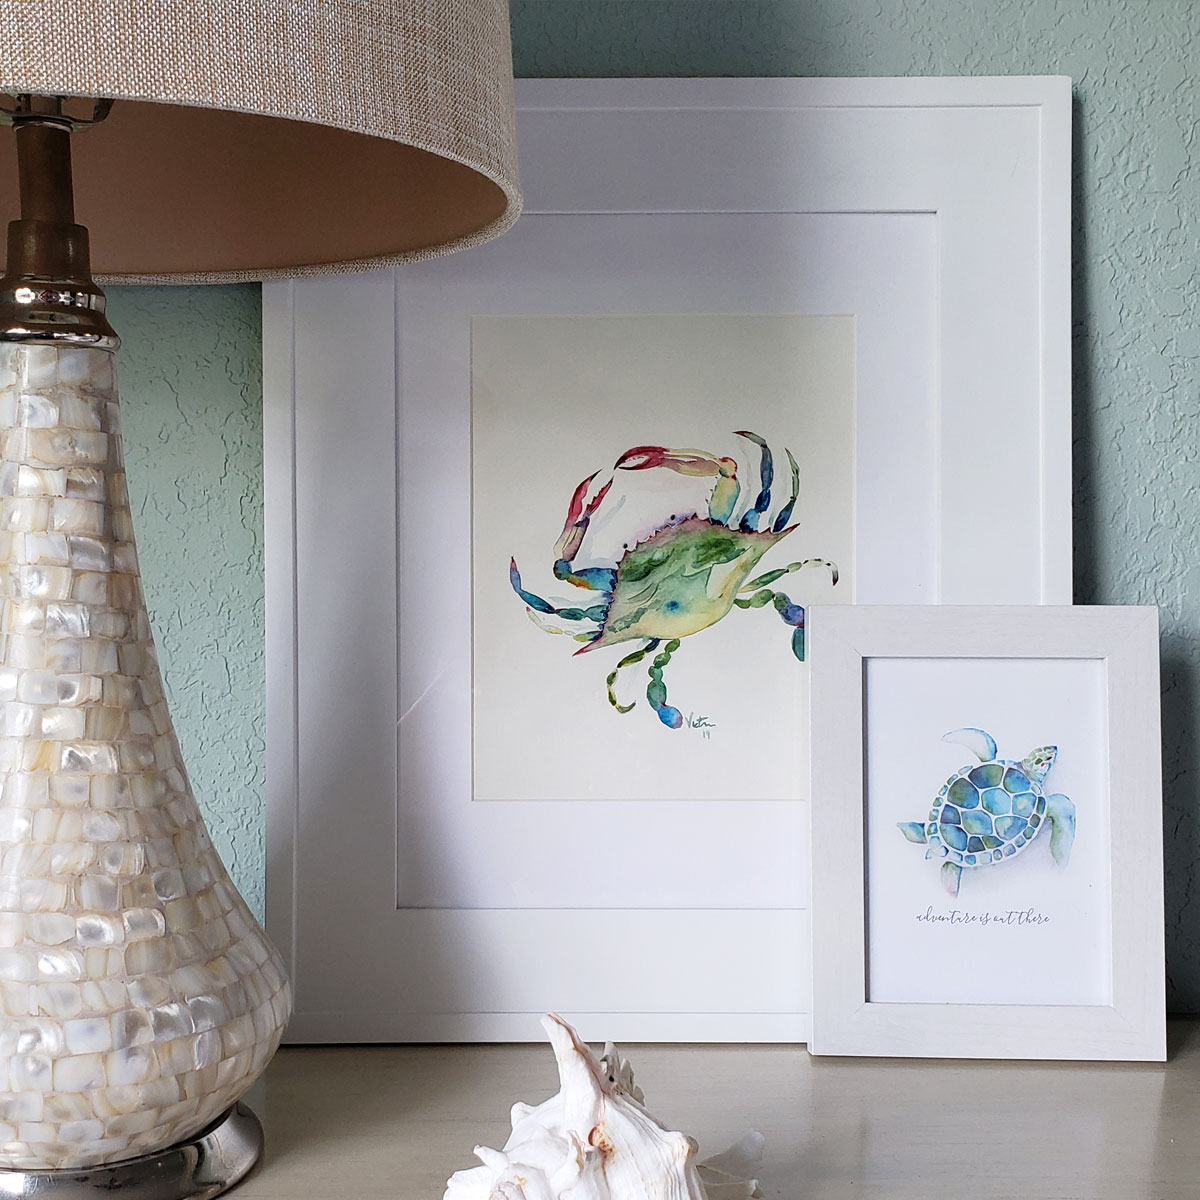 Watercolor blue crab painted by Victoria Grigaliunas was accepted to the APBC Summer Dreams Juried Exhbit.